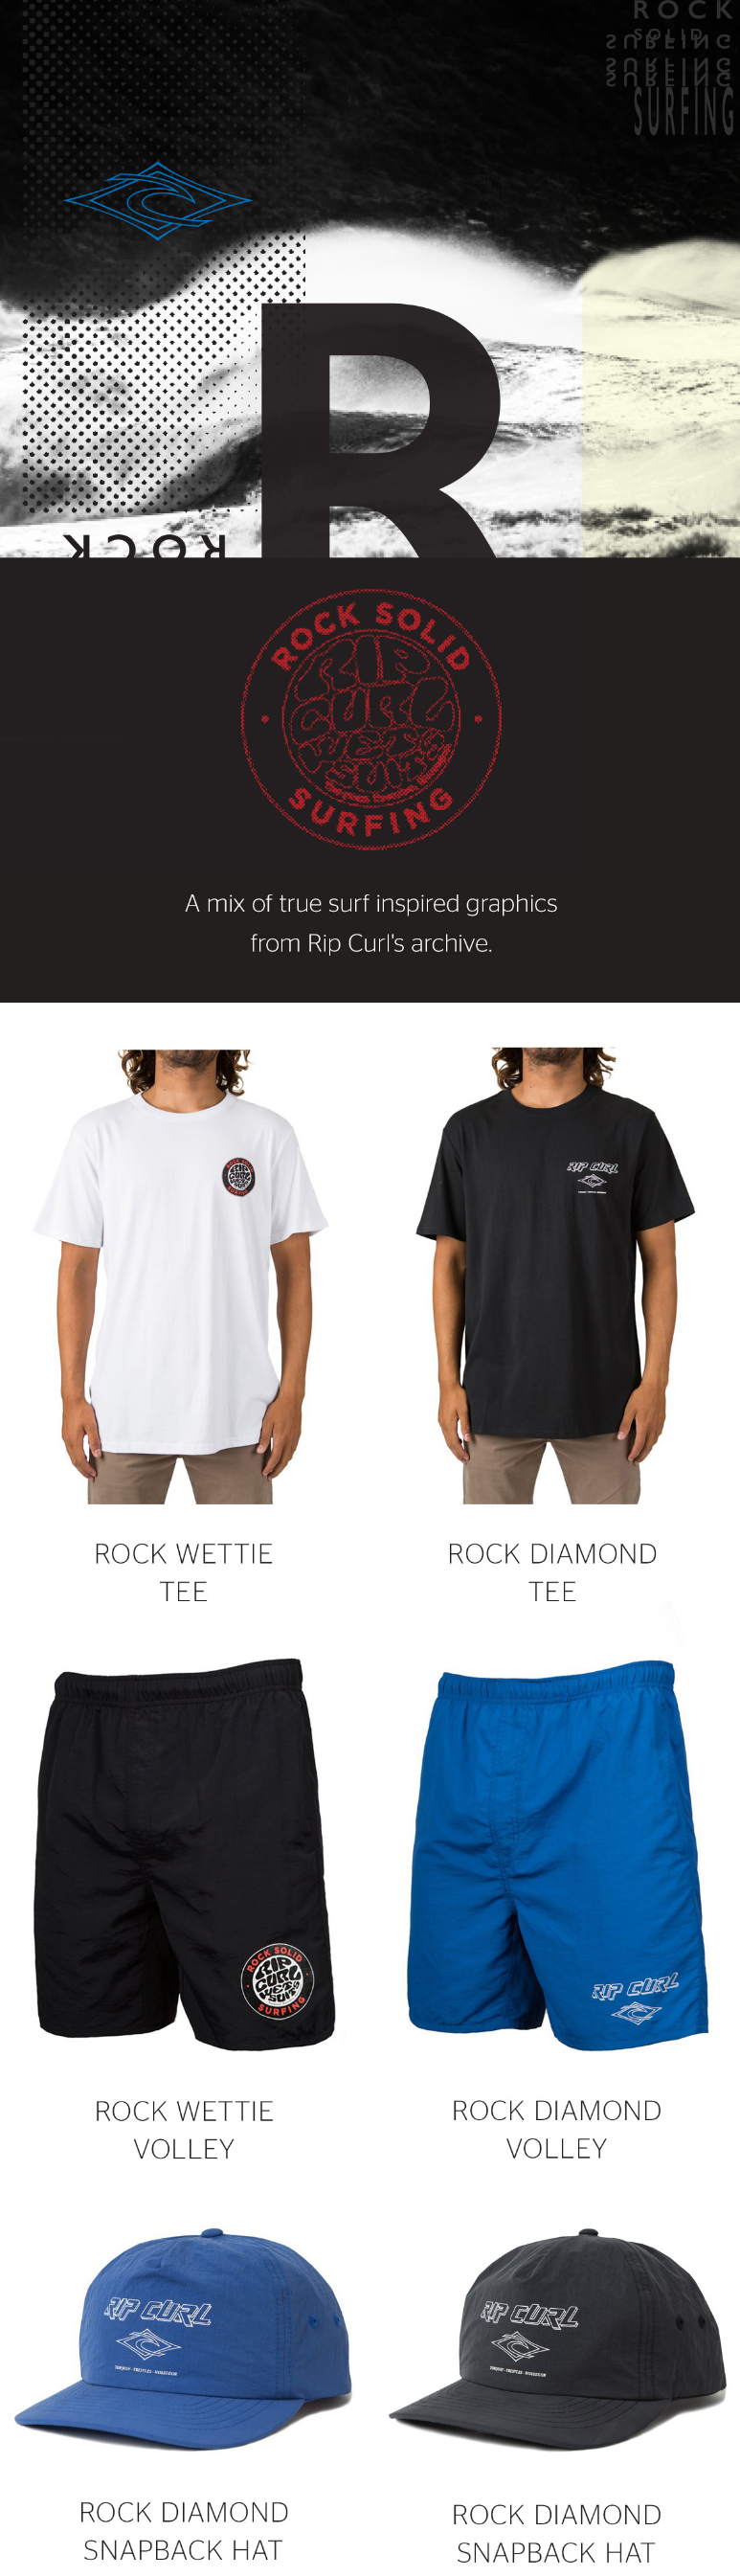 A mix of true surf inspired graphics from Rip Curl's archive and 90's surf fashion.